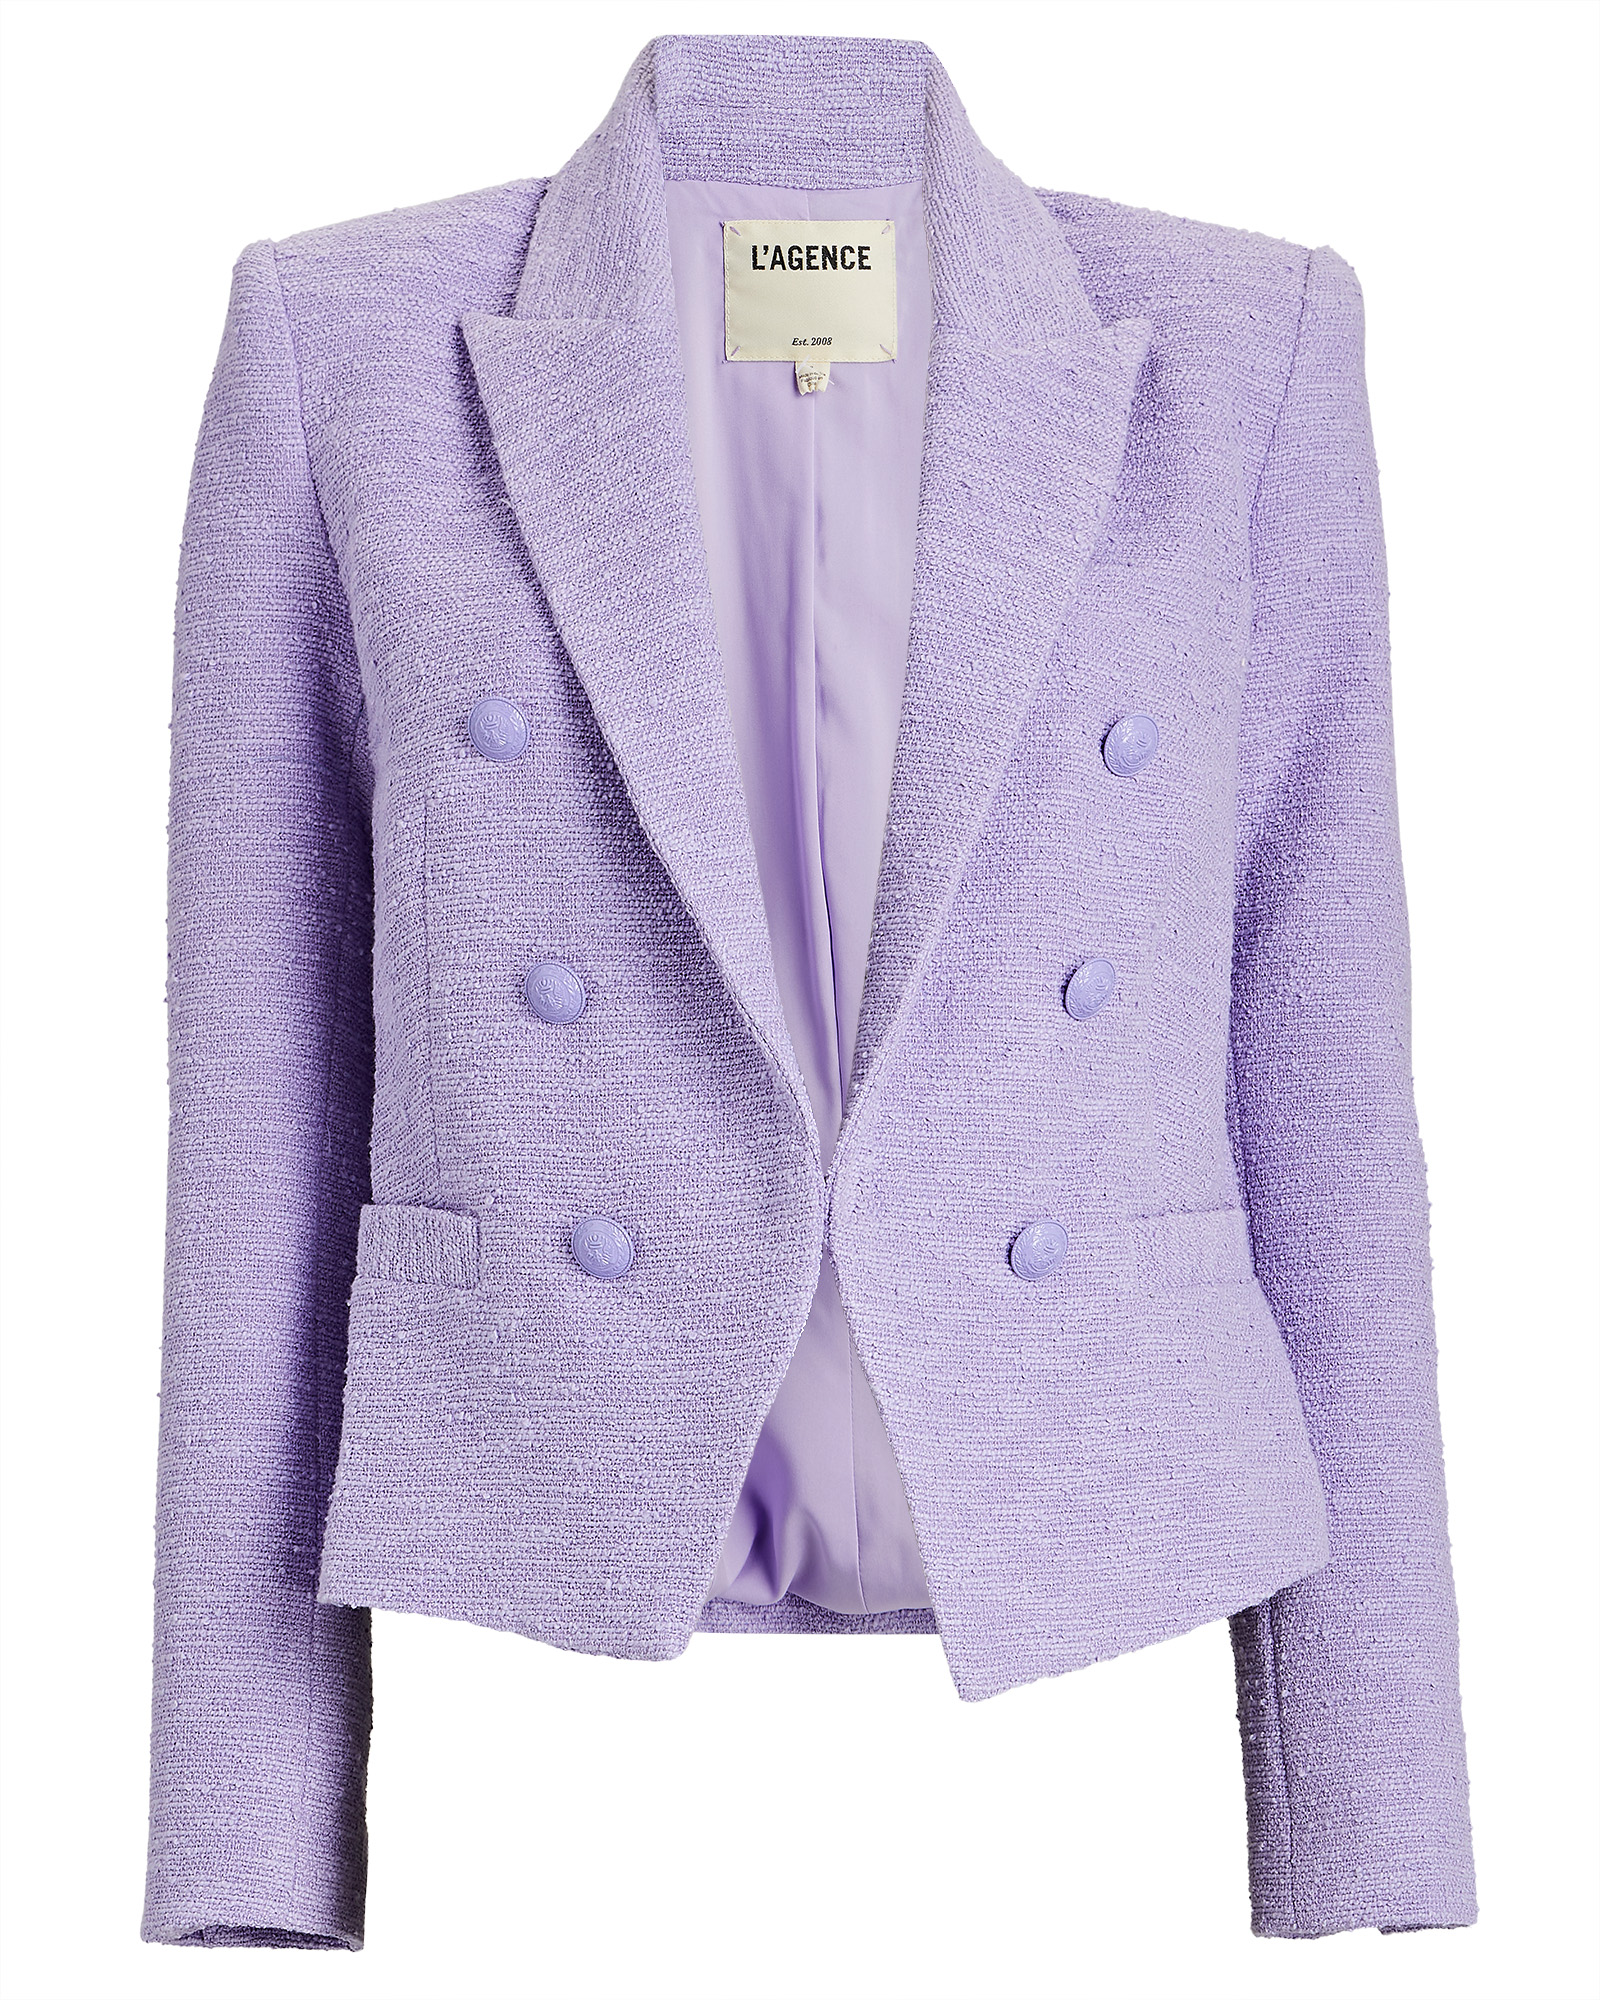 LAgence Tweed Brooke Double Breasted Crop Blazer in Lavender Womens Clothing Jackets Blazers Purple sport coats and suit jackets 